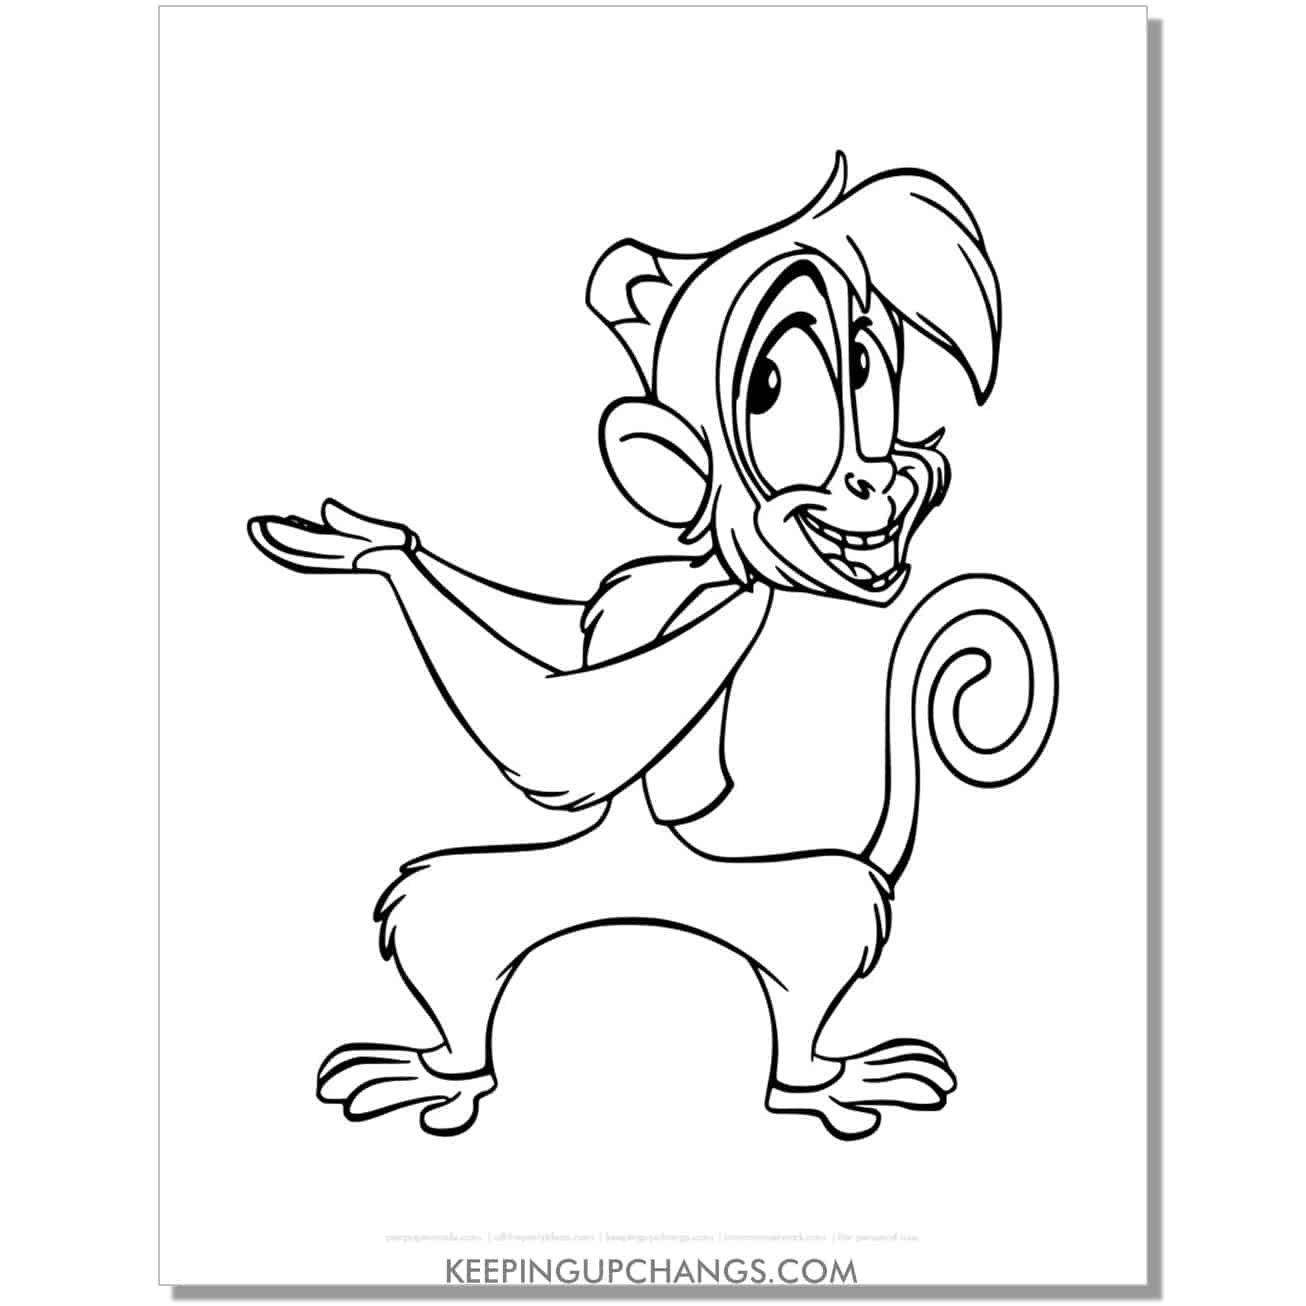 aladdin abu clapping hands coloring page, sheet.